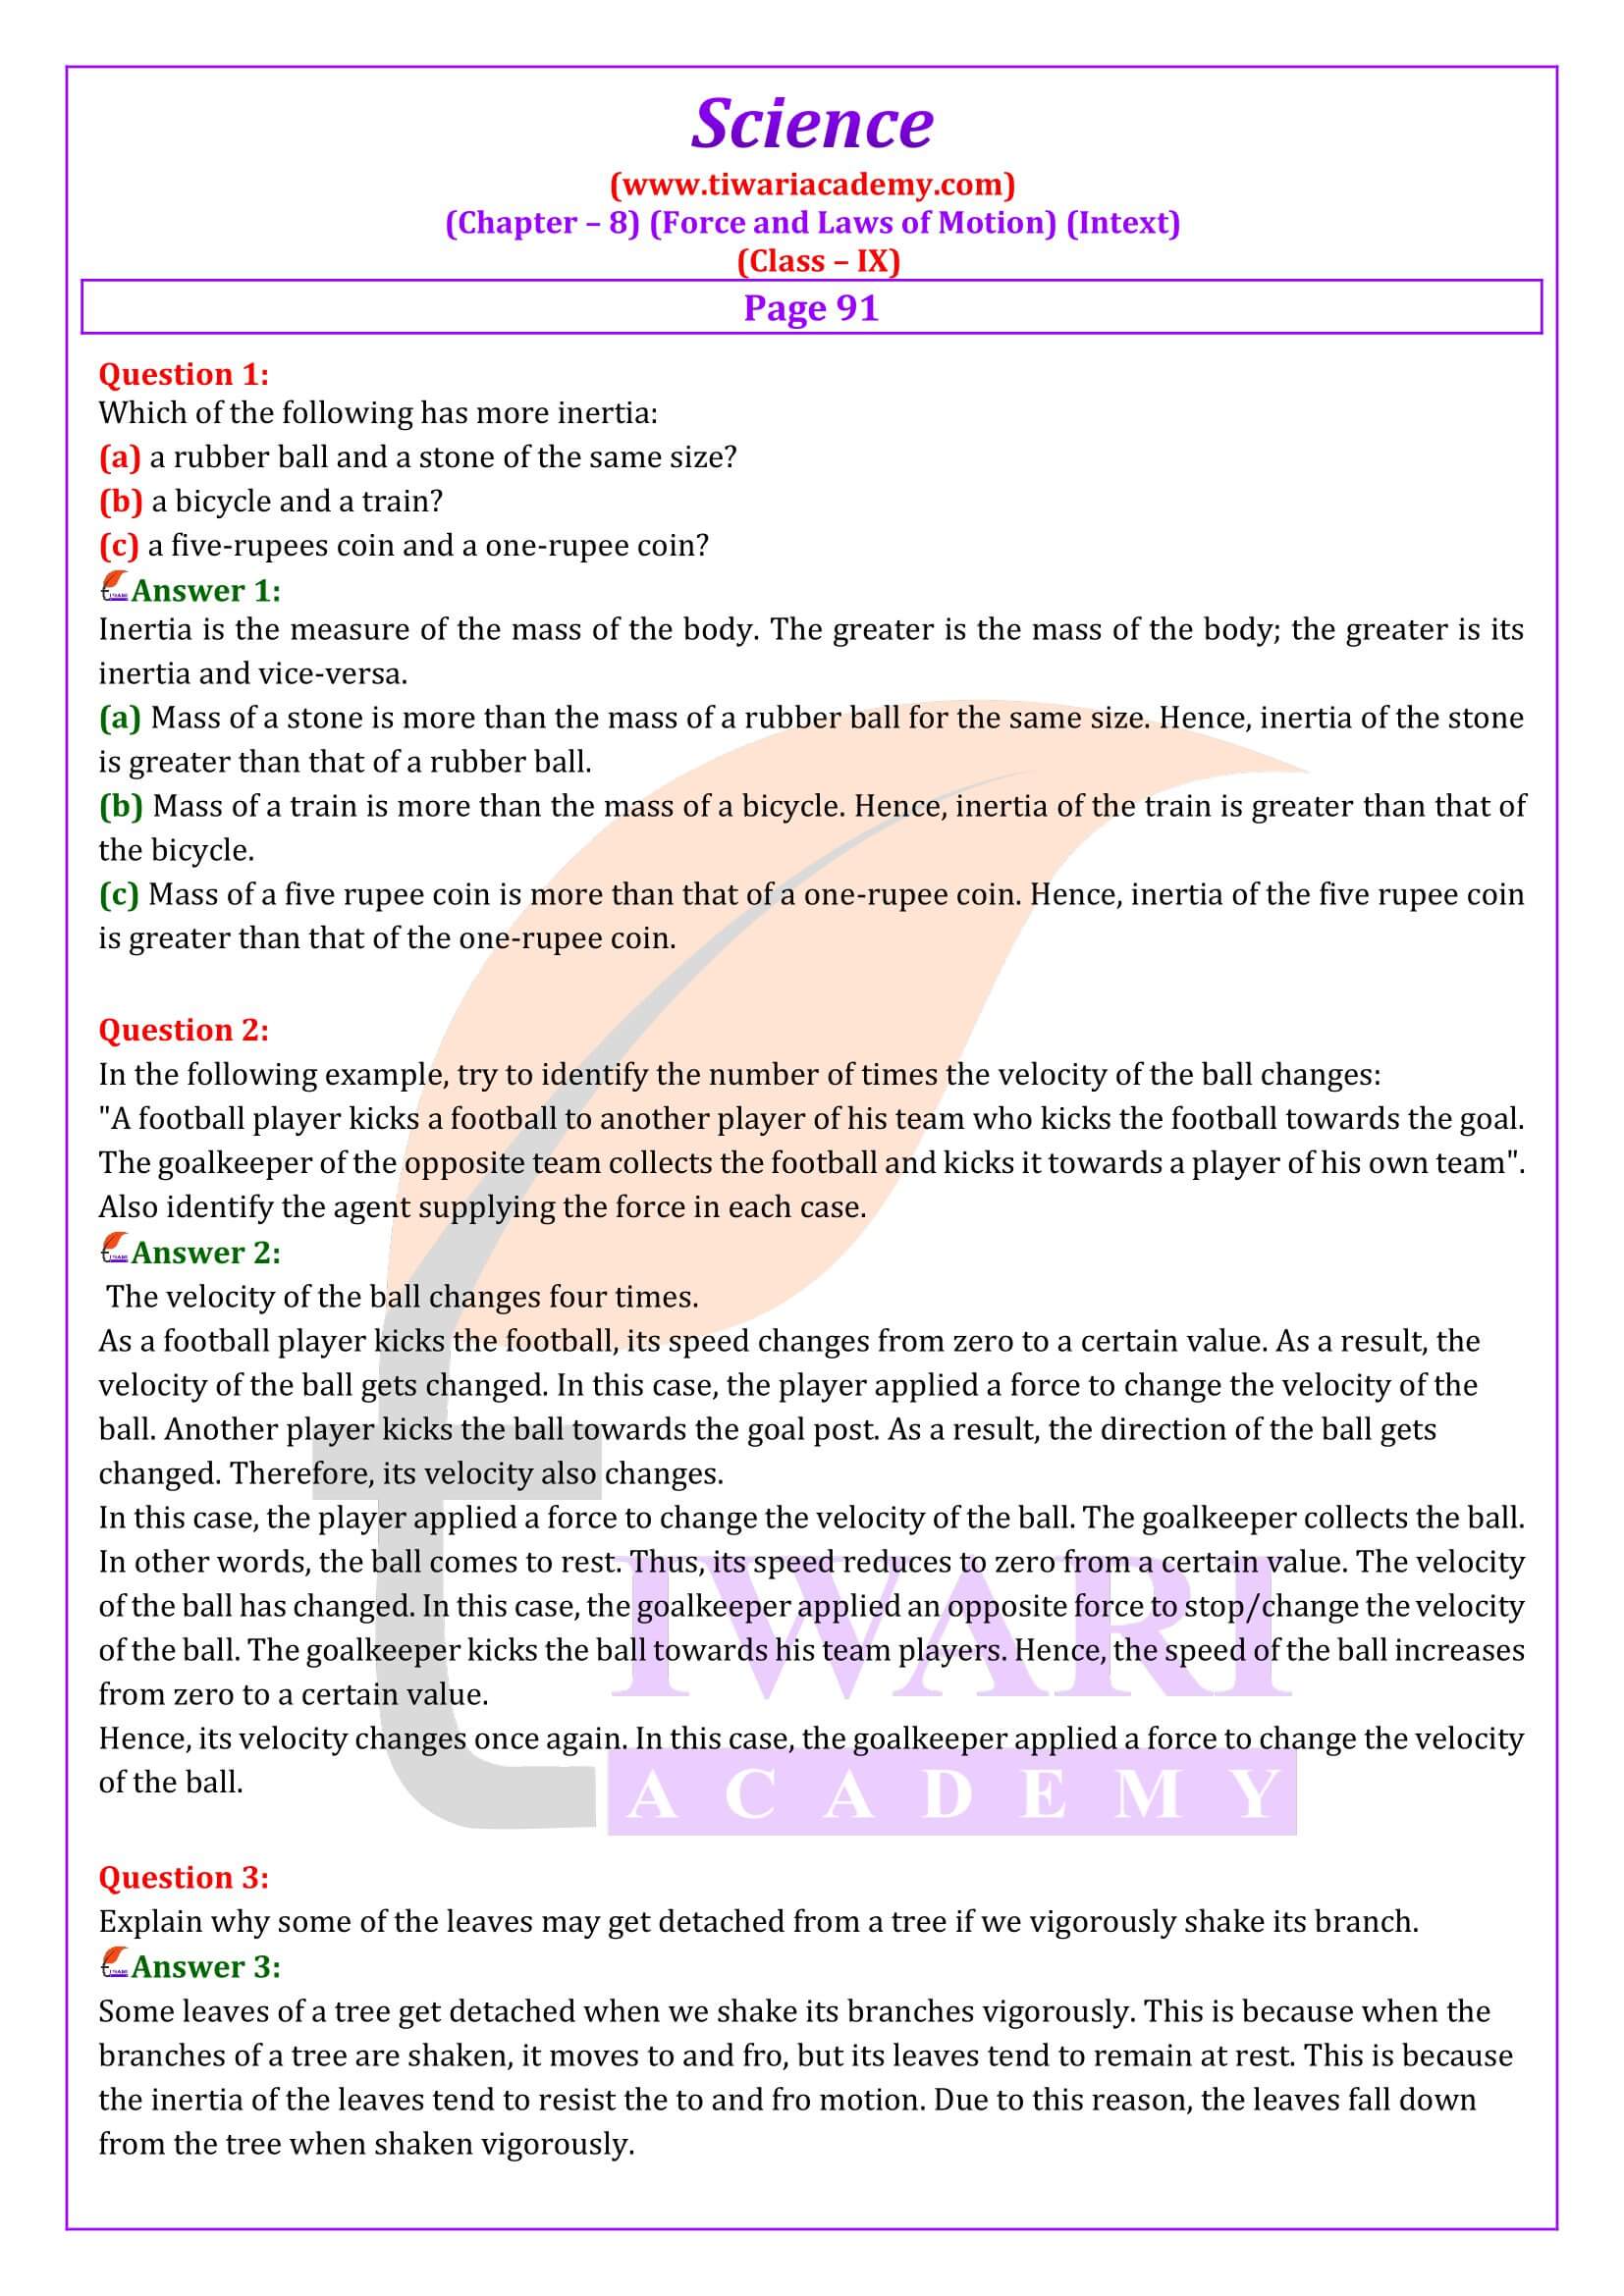 NCERT Solutions for Class 9 Science Chapter 8 Intext Questions